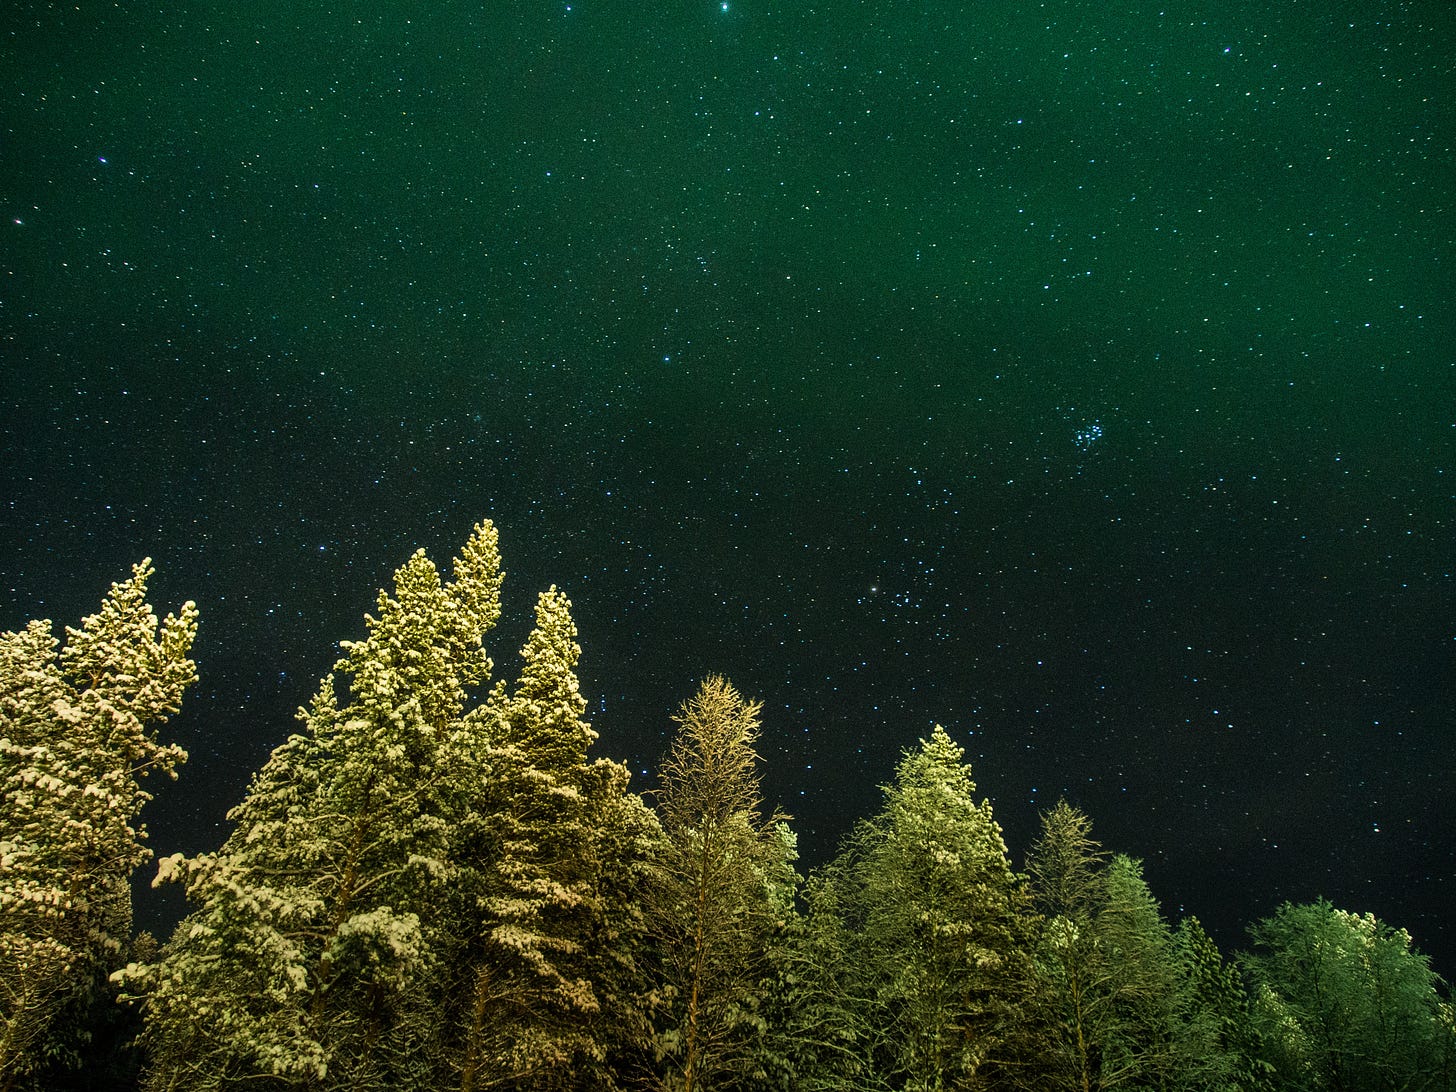 A line of tall pine trees at night, with a starry, green-tinged night sky overhead.